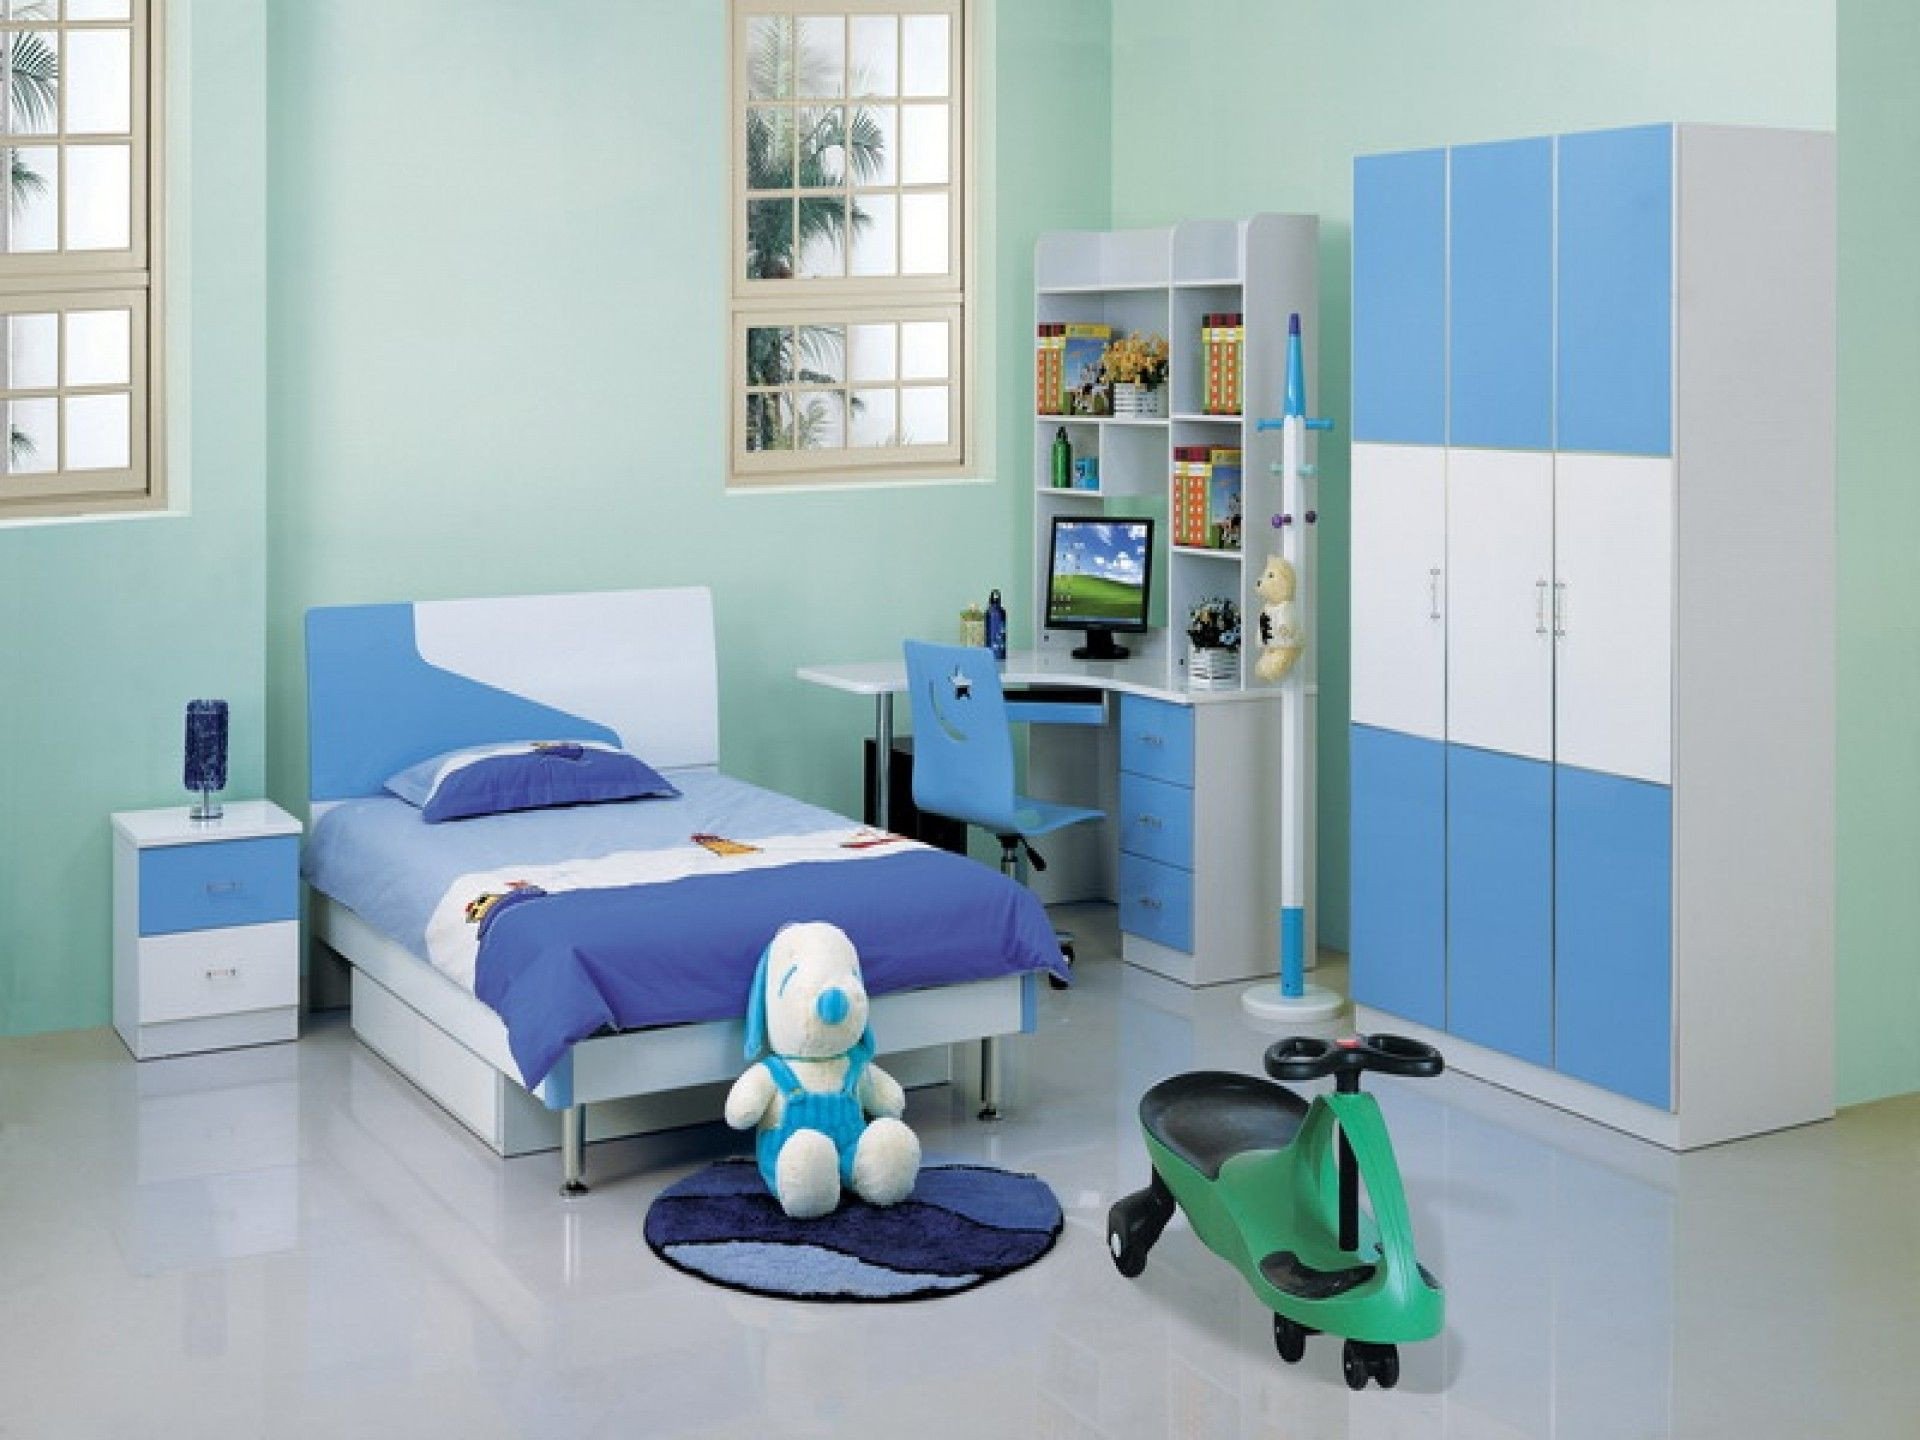 Toddlers Bedroom Furniture Set Best Of Winsome Children Room Furniture Design Ideas In White and